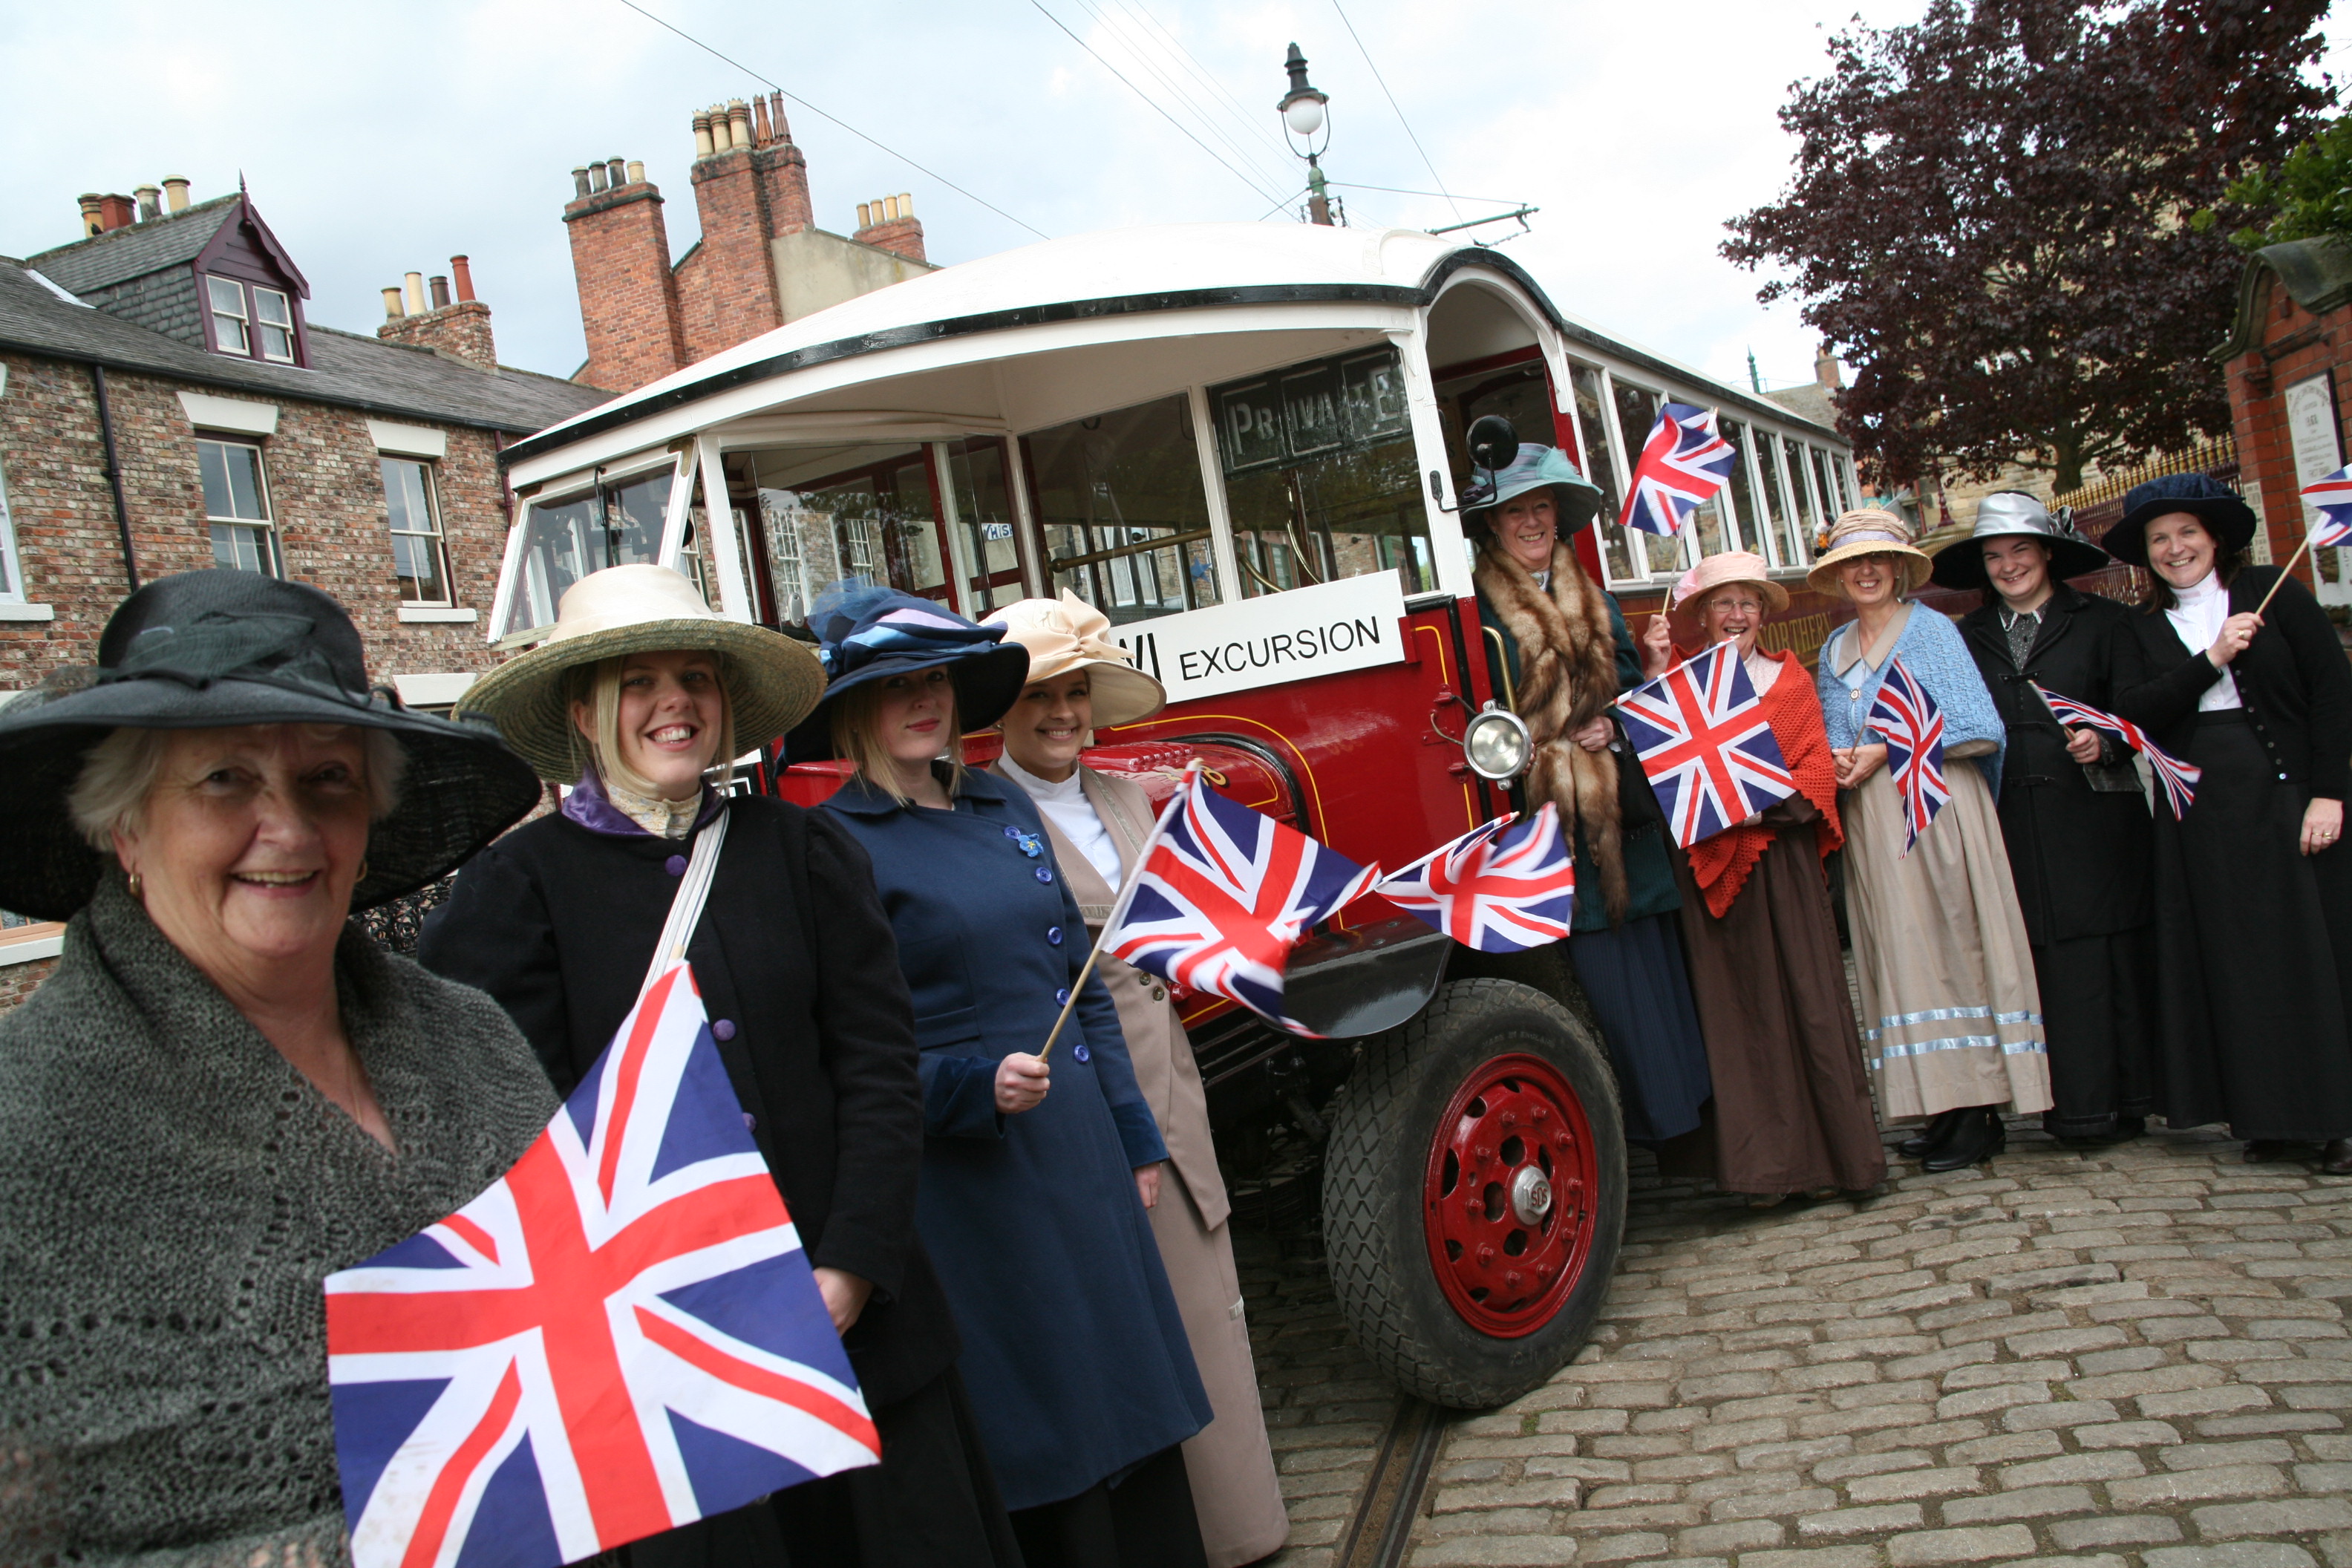 Beamish, Museum, Attraction, North East, Events, England, Great Day Out, Top Ten Places, Family Friendly, Dog Friendly, Victorian, 1940s, World War Two, 1950s, Festival, Transport, Costume, Learning, Award, group, travel.